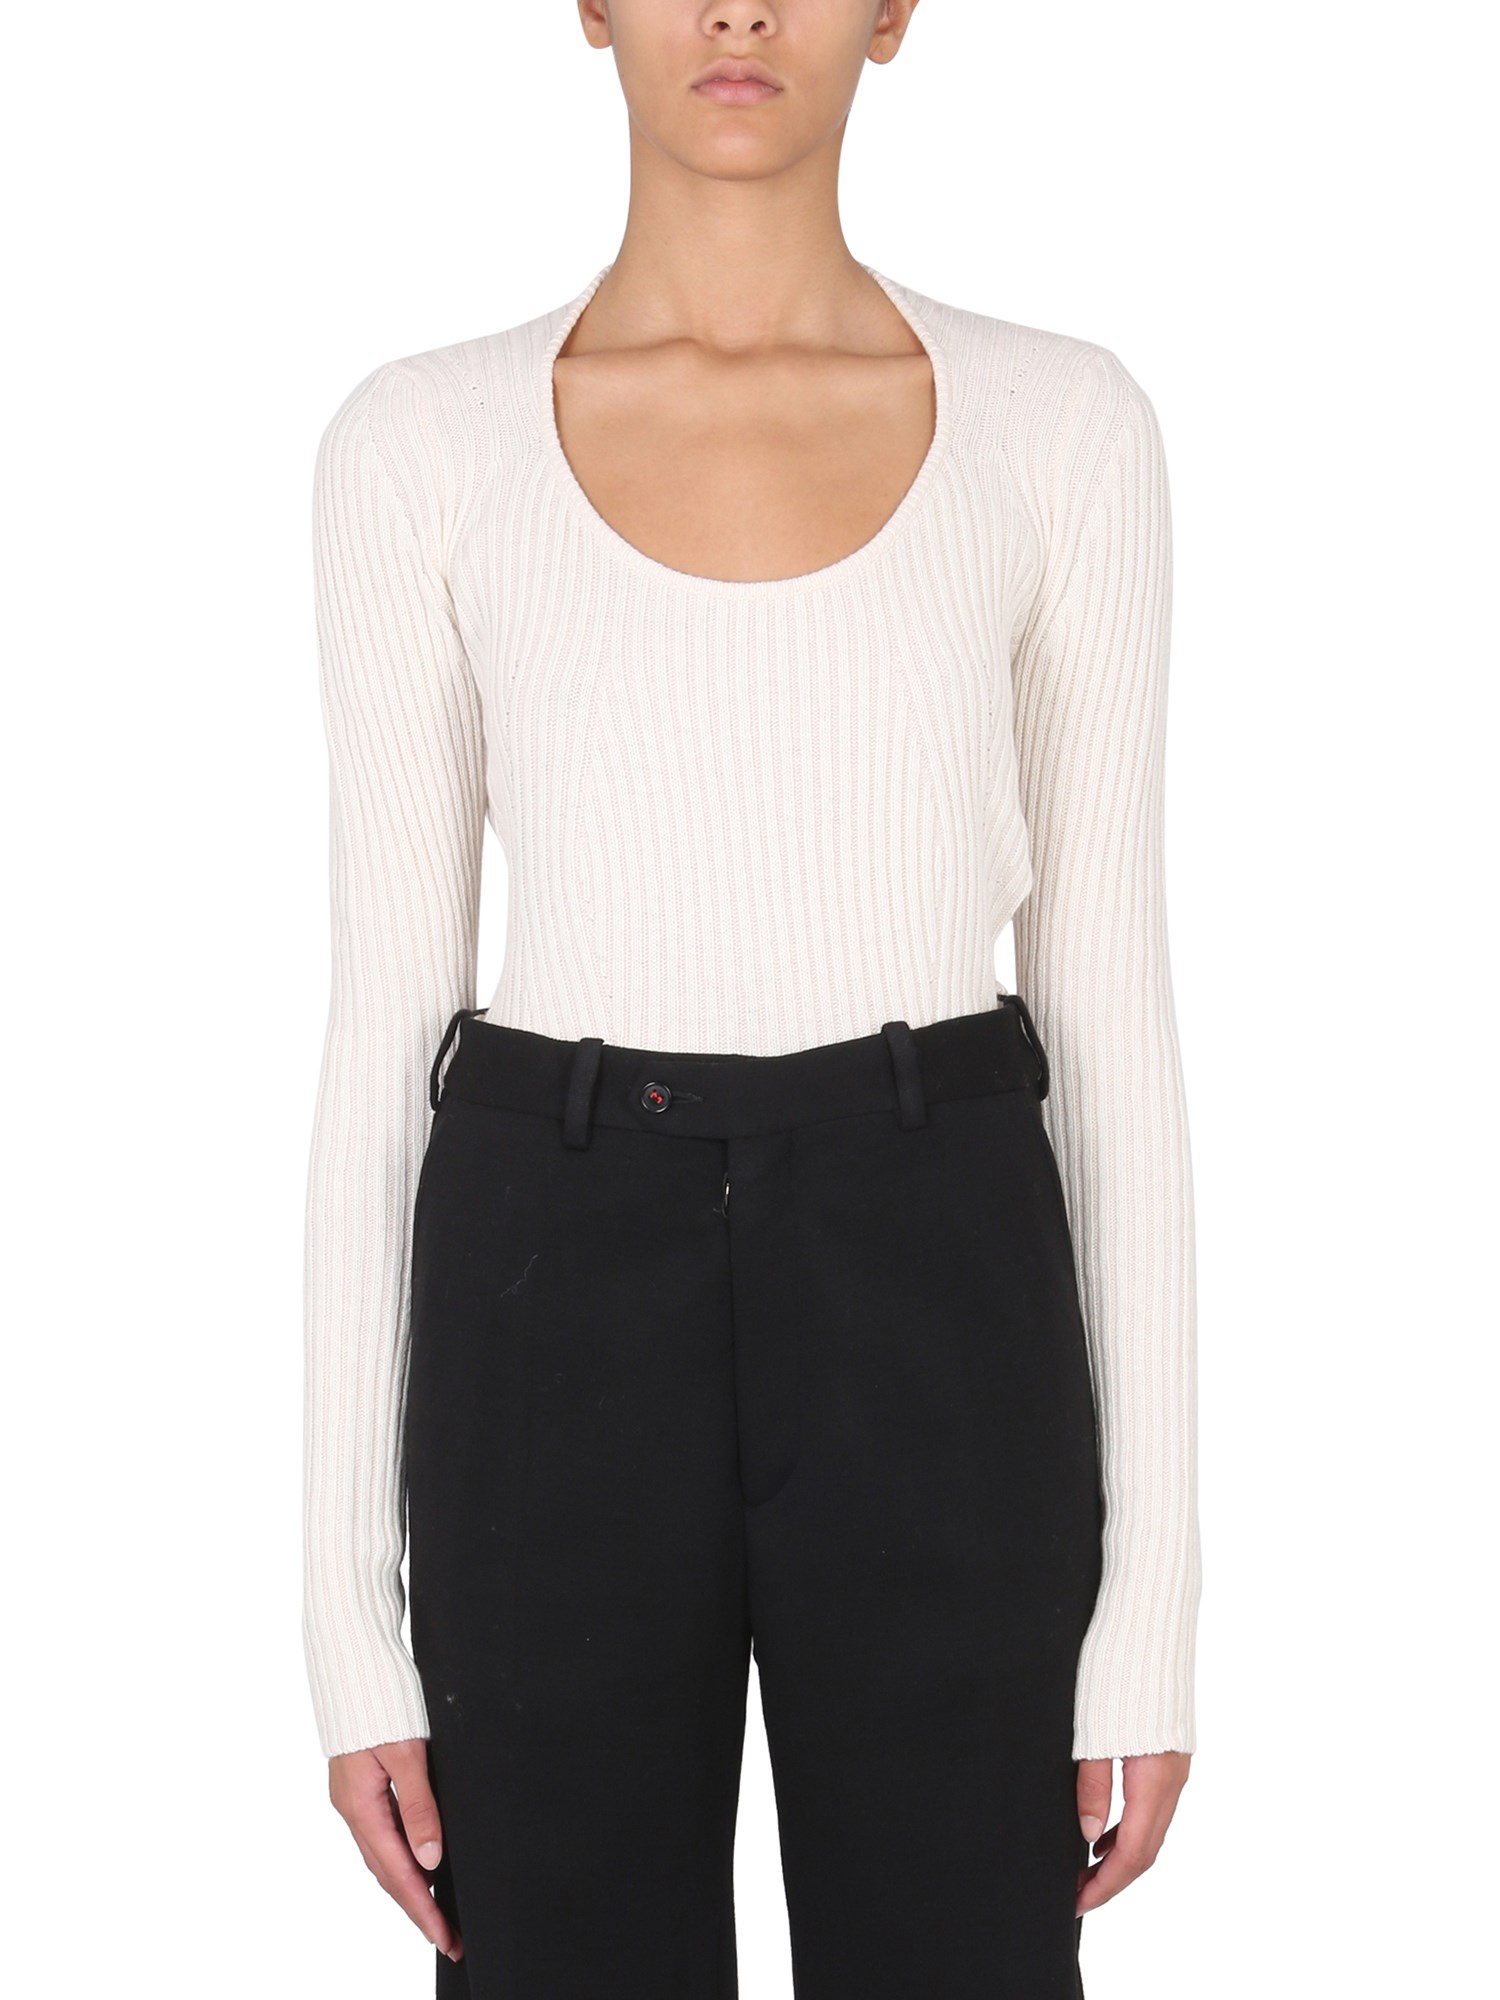 proenza schouler white label ribbed sweater.